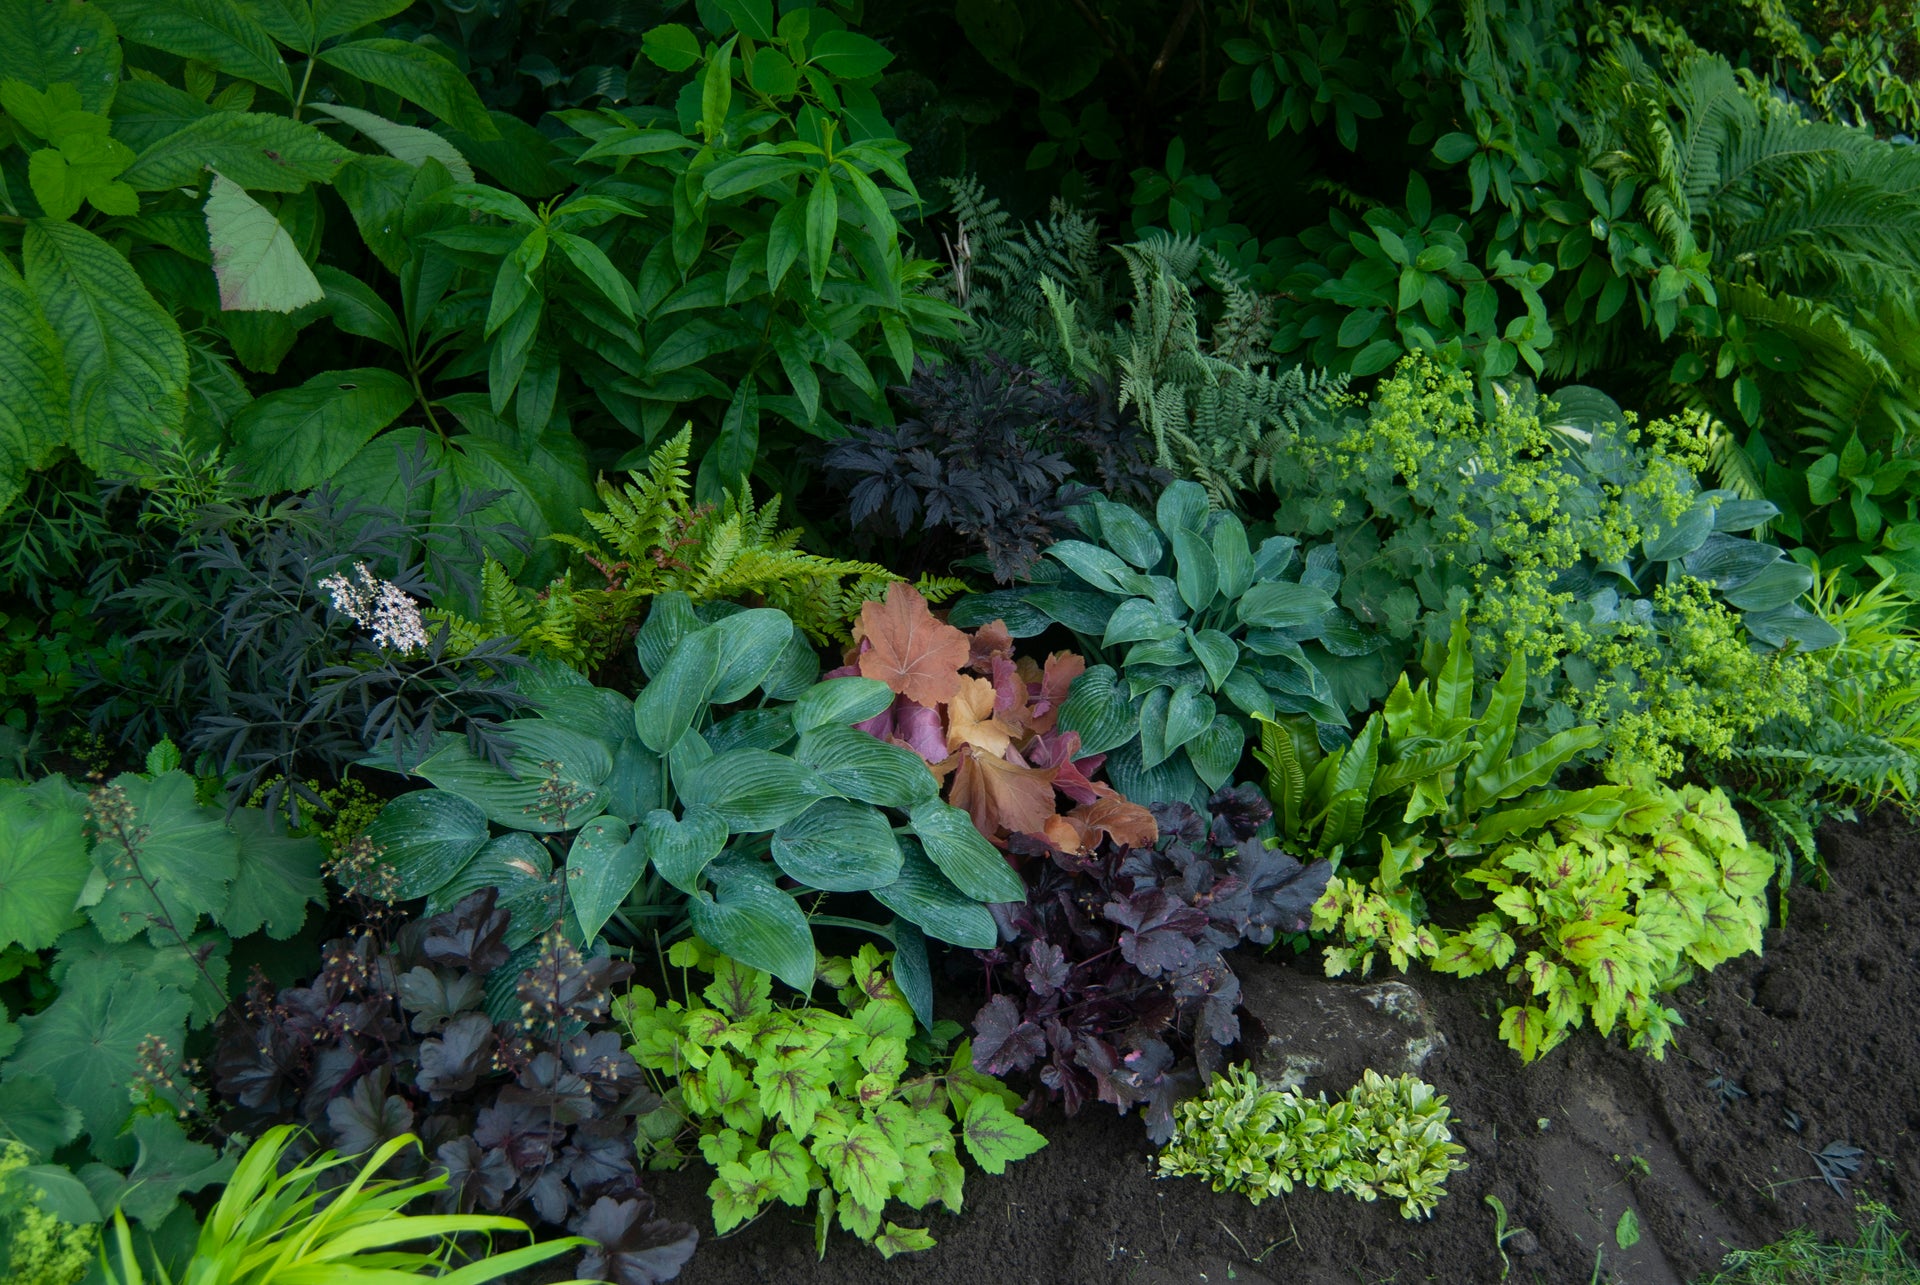 Hostas, coral bells, and other shade plants in the garden